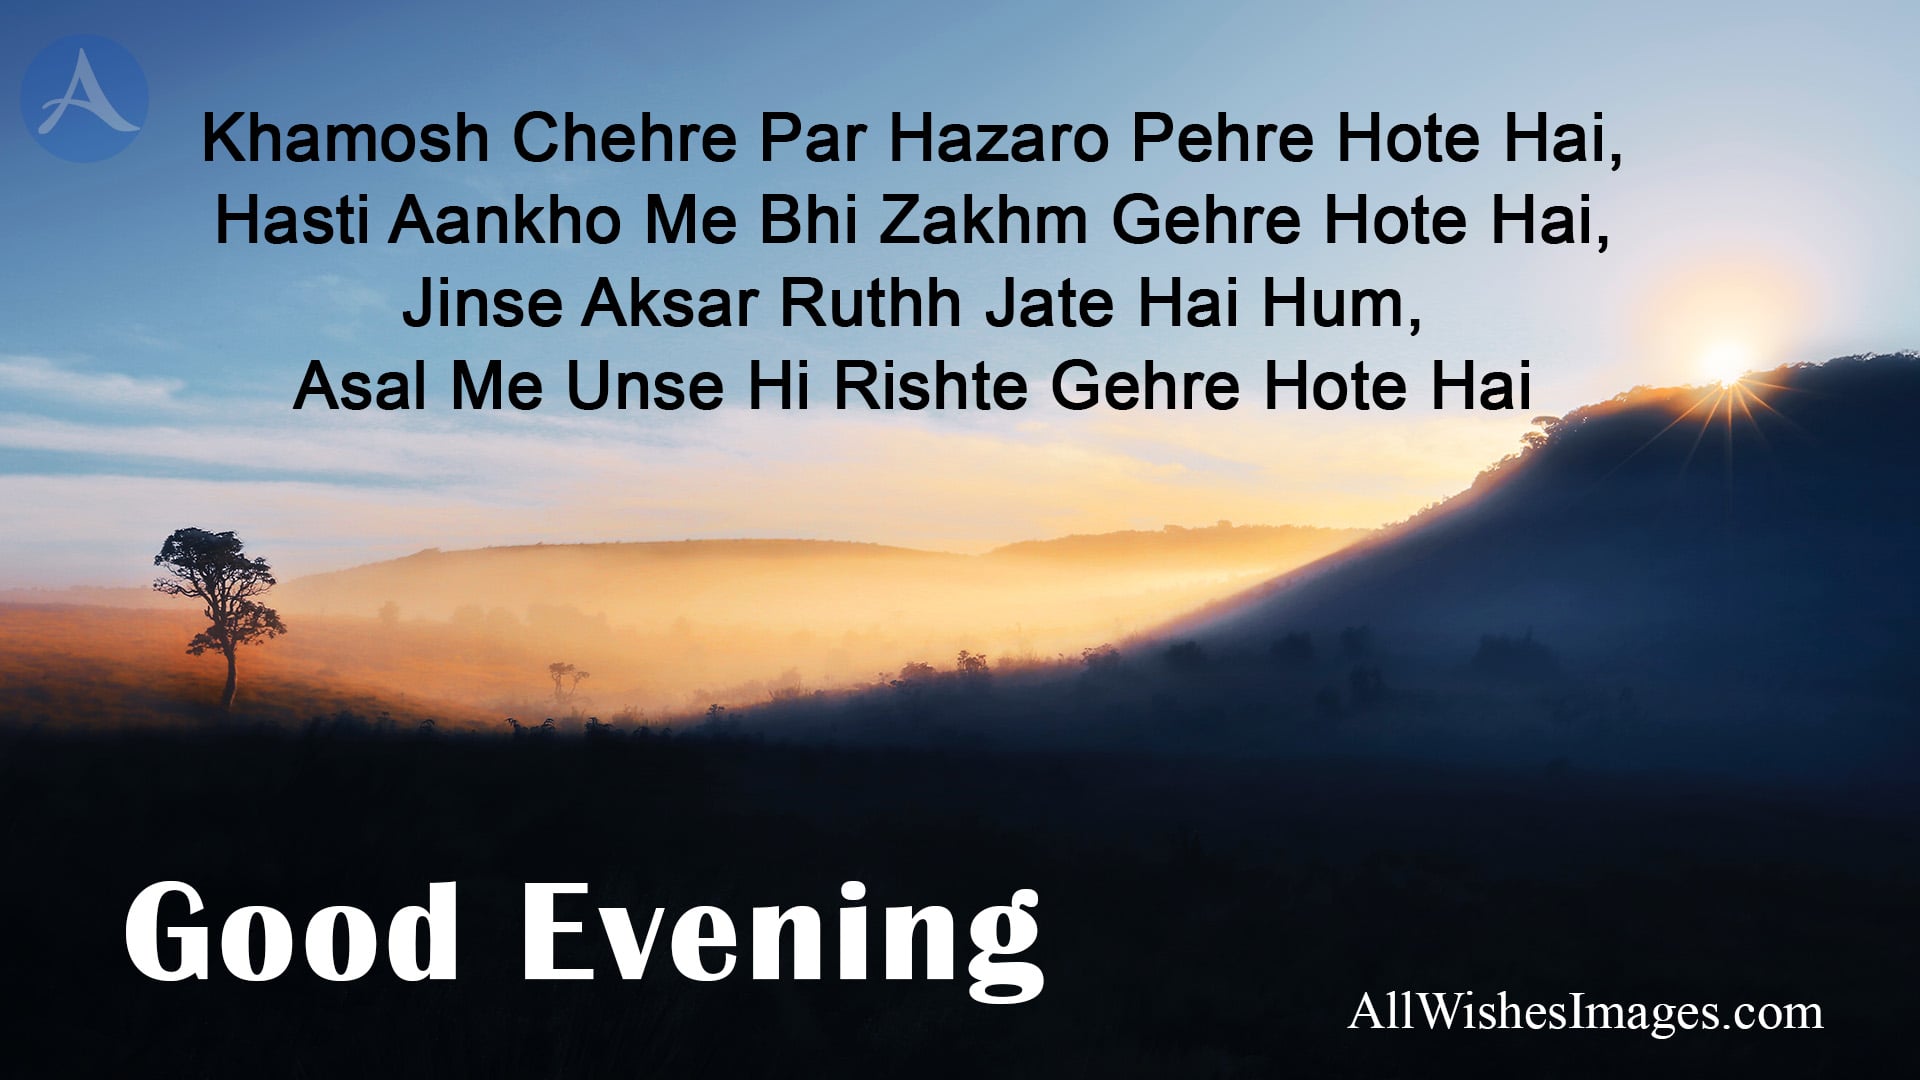 Good Evening Images In Hindi Shayari - All Wishes Images - Images for  WhatsApp